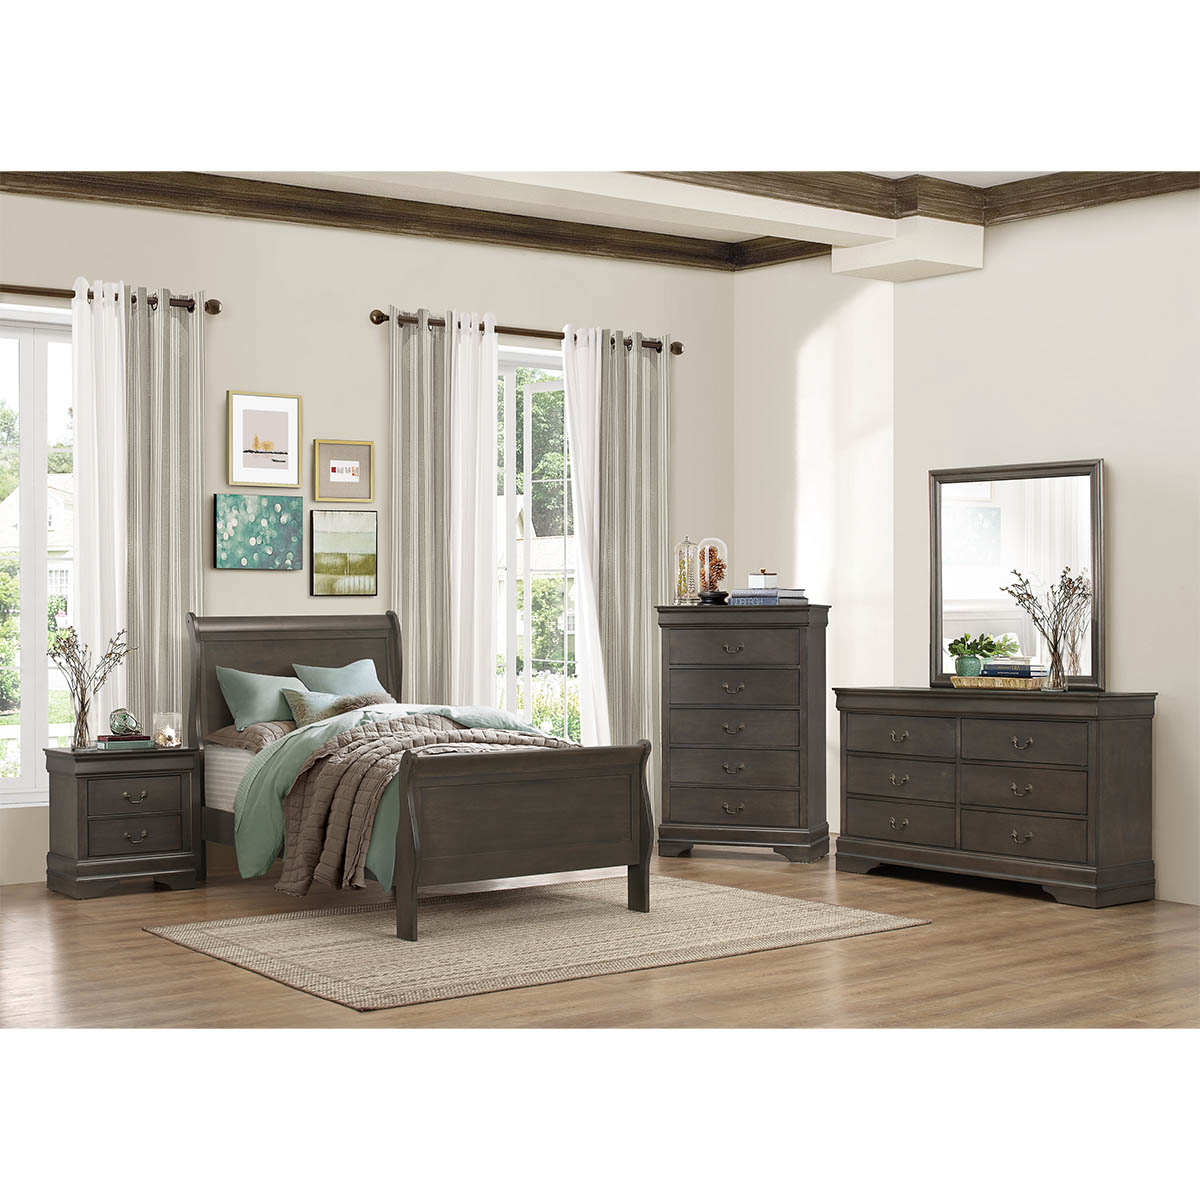 Homelegance Mayville Grey Youth Twin Sleigh Bed, Dresser, Mirror, and Nightstand